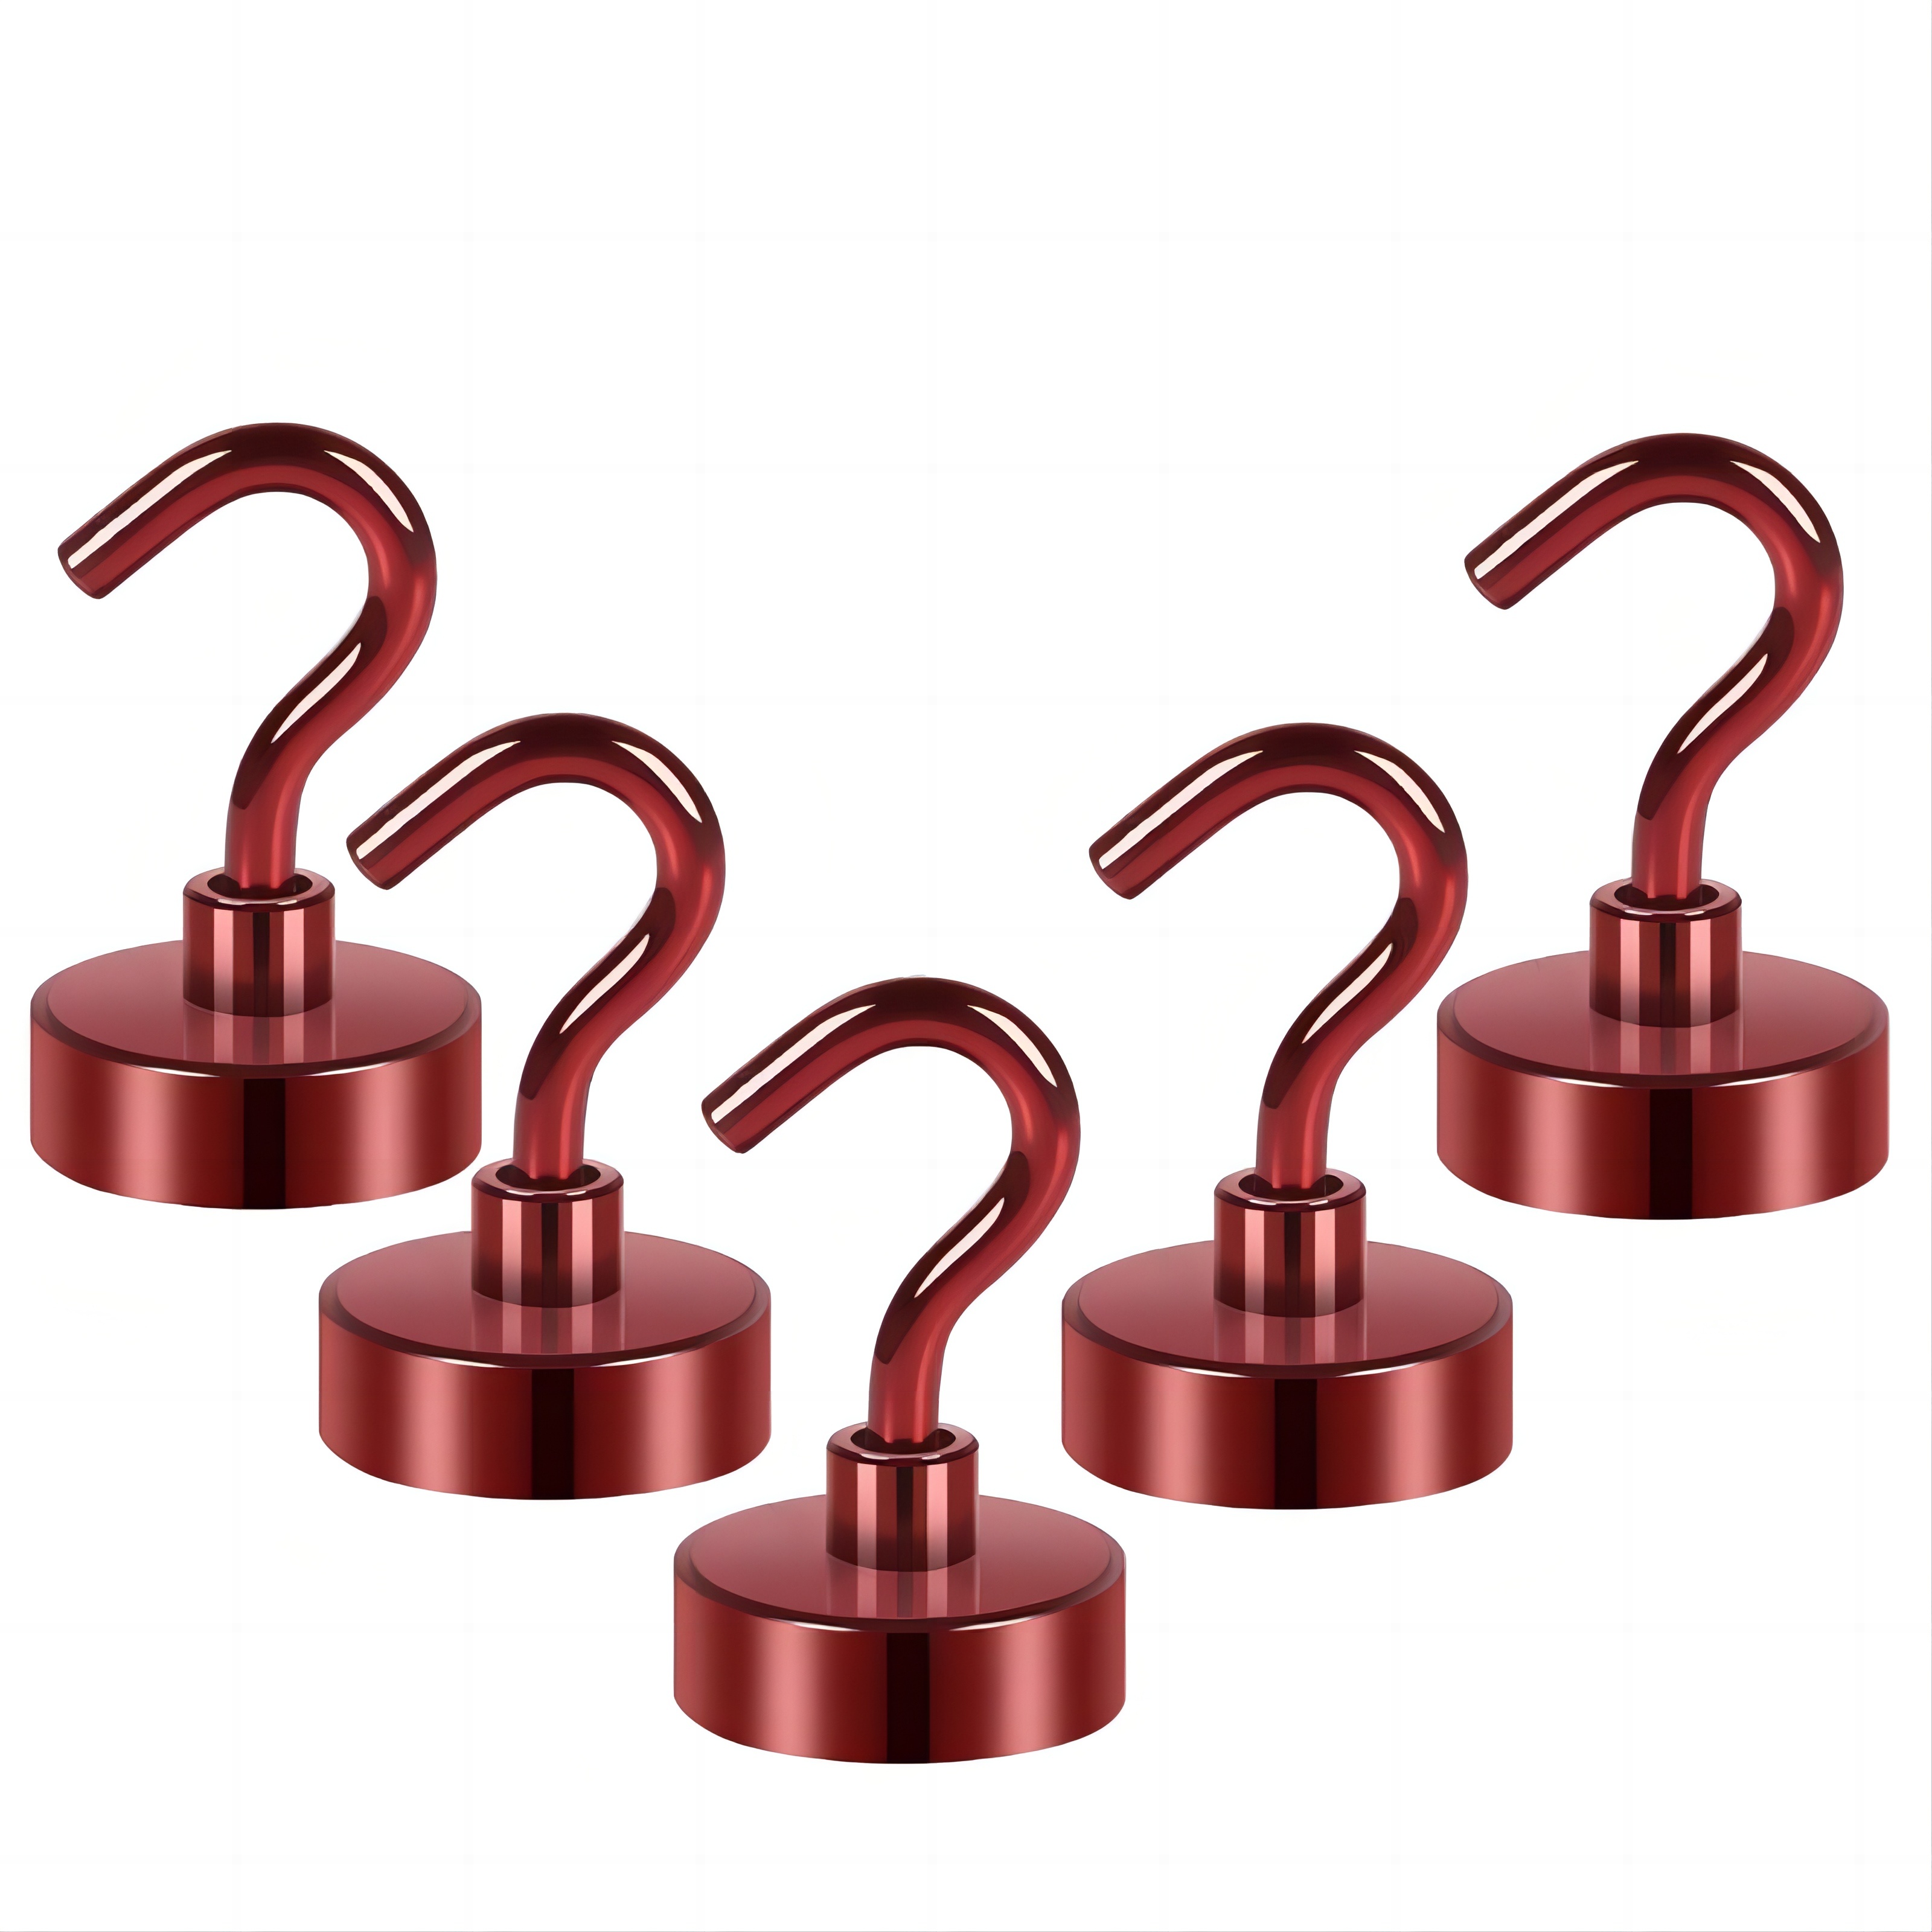 

5pcs Magnetic Hook, 25lbs Strong Heavy-duty Cruise Magnet S-shaped Hook, Suitable For Refrigerators, Suspensions, Cabins, Barbecues, Kitchens, Garages, Workplaces, And Offices.(red)